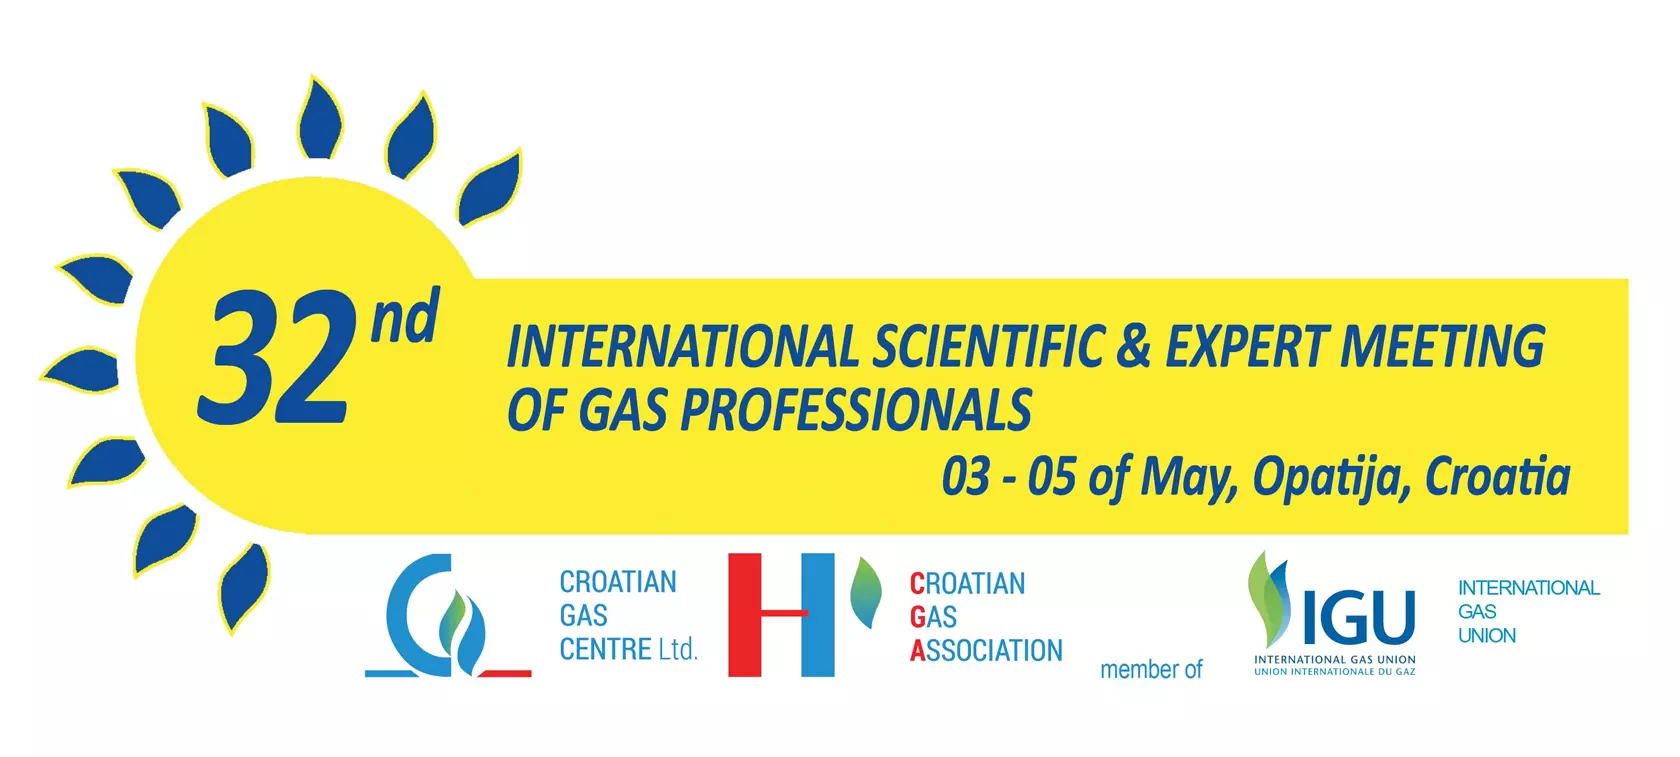 Gas Professionals Meeting: Call for Papers